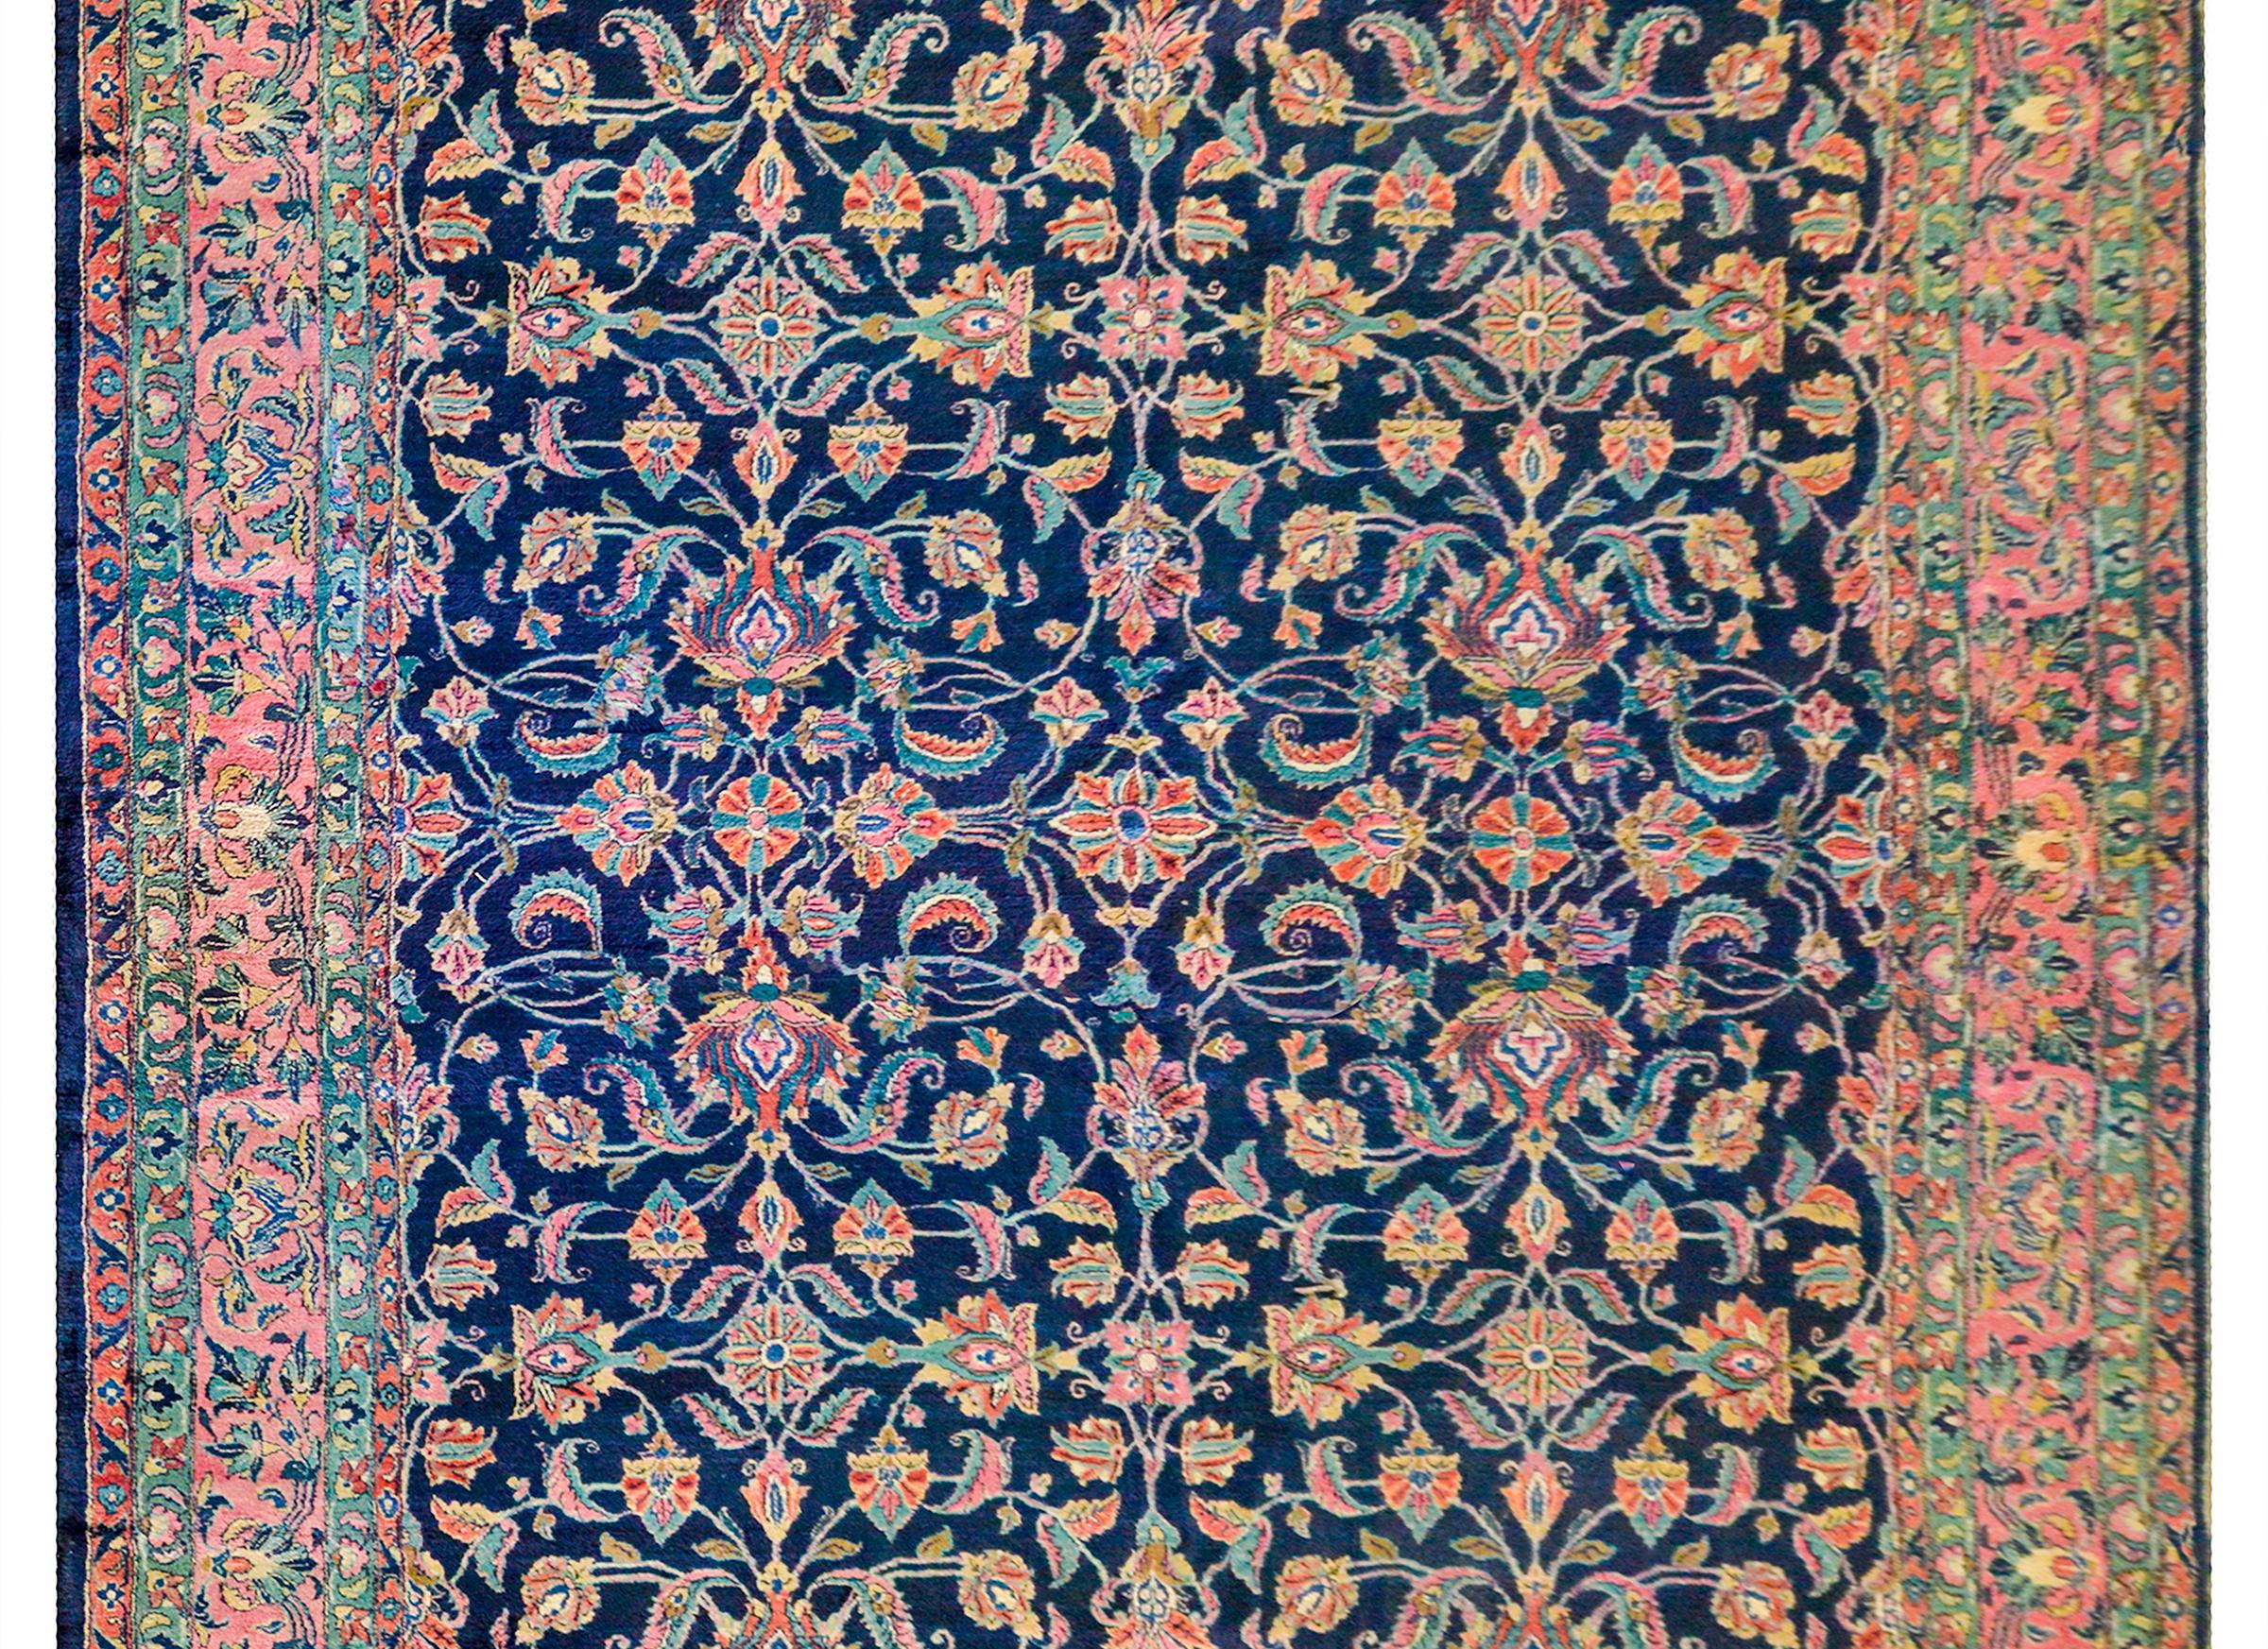 An absolutely incredible early 20th century antique Persian Sarouk rug with an all-over mirrored floral and scrolling vine lattice pattern woven in orange, pink gold, and light and dark indigo, on a dark indigo background. The border is wonderful